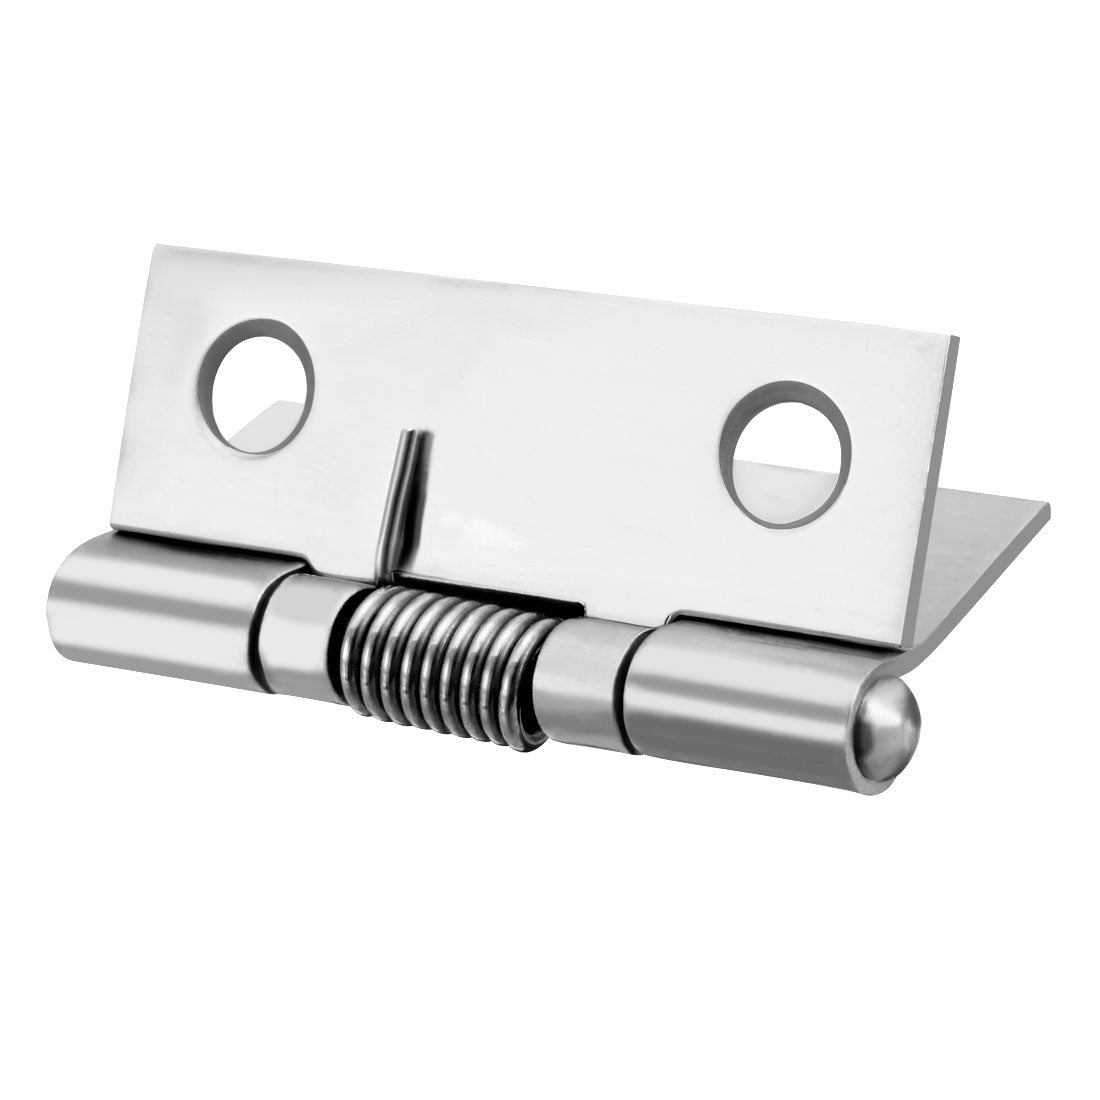 uxcell Uxcell Self Closing Spring Hinge 1.5" Stainless Steel Brushed DIY Hardware for Door Cabinet Small Box 5pcs per Pack